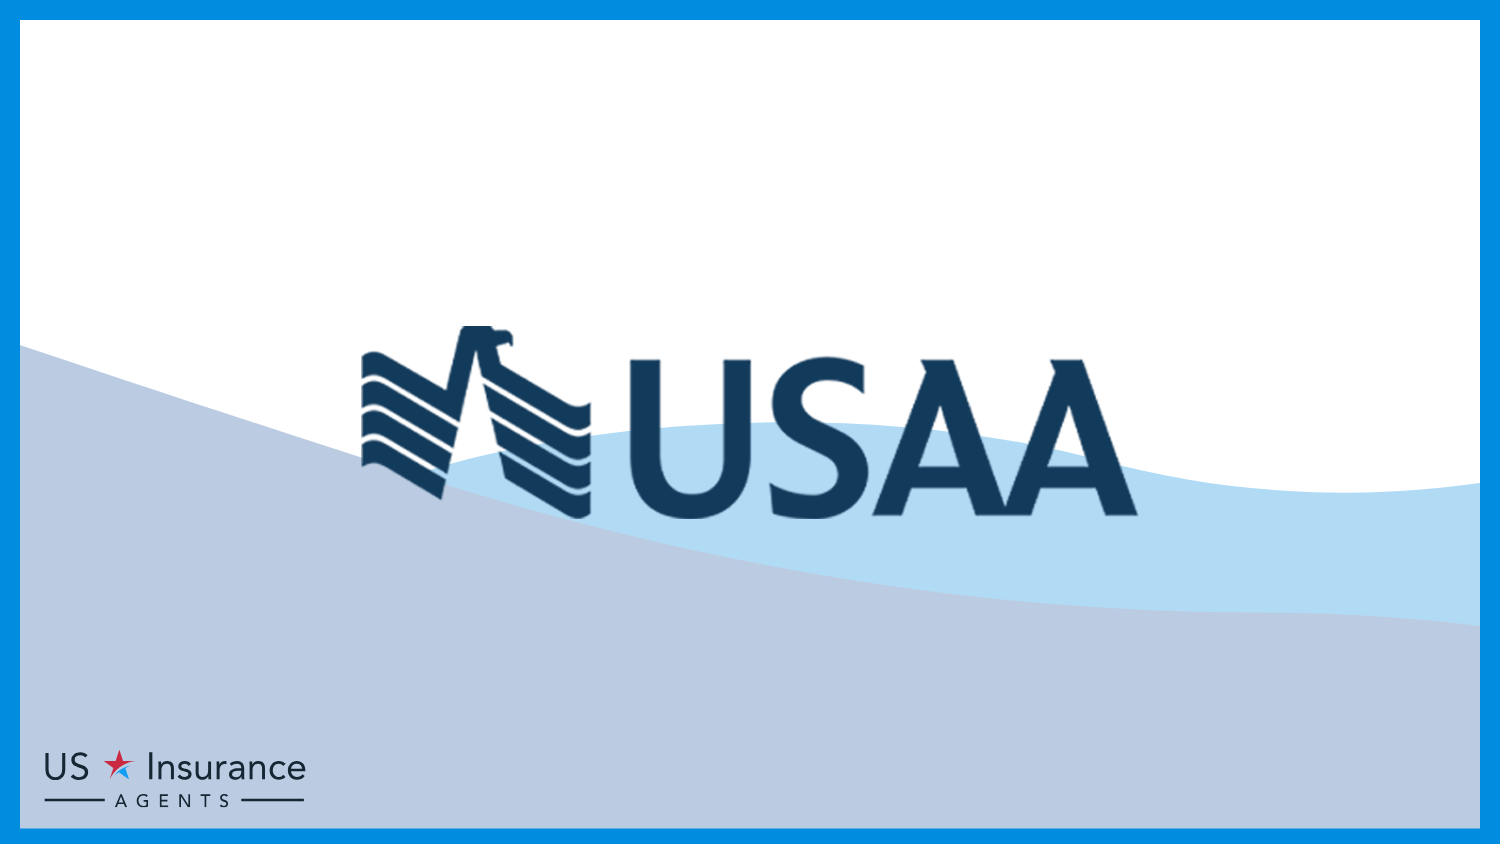 USAA: Best Business Insurance for Civil Engineers